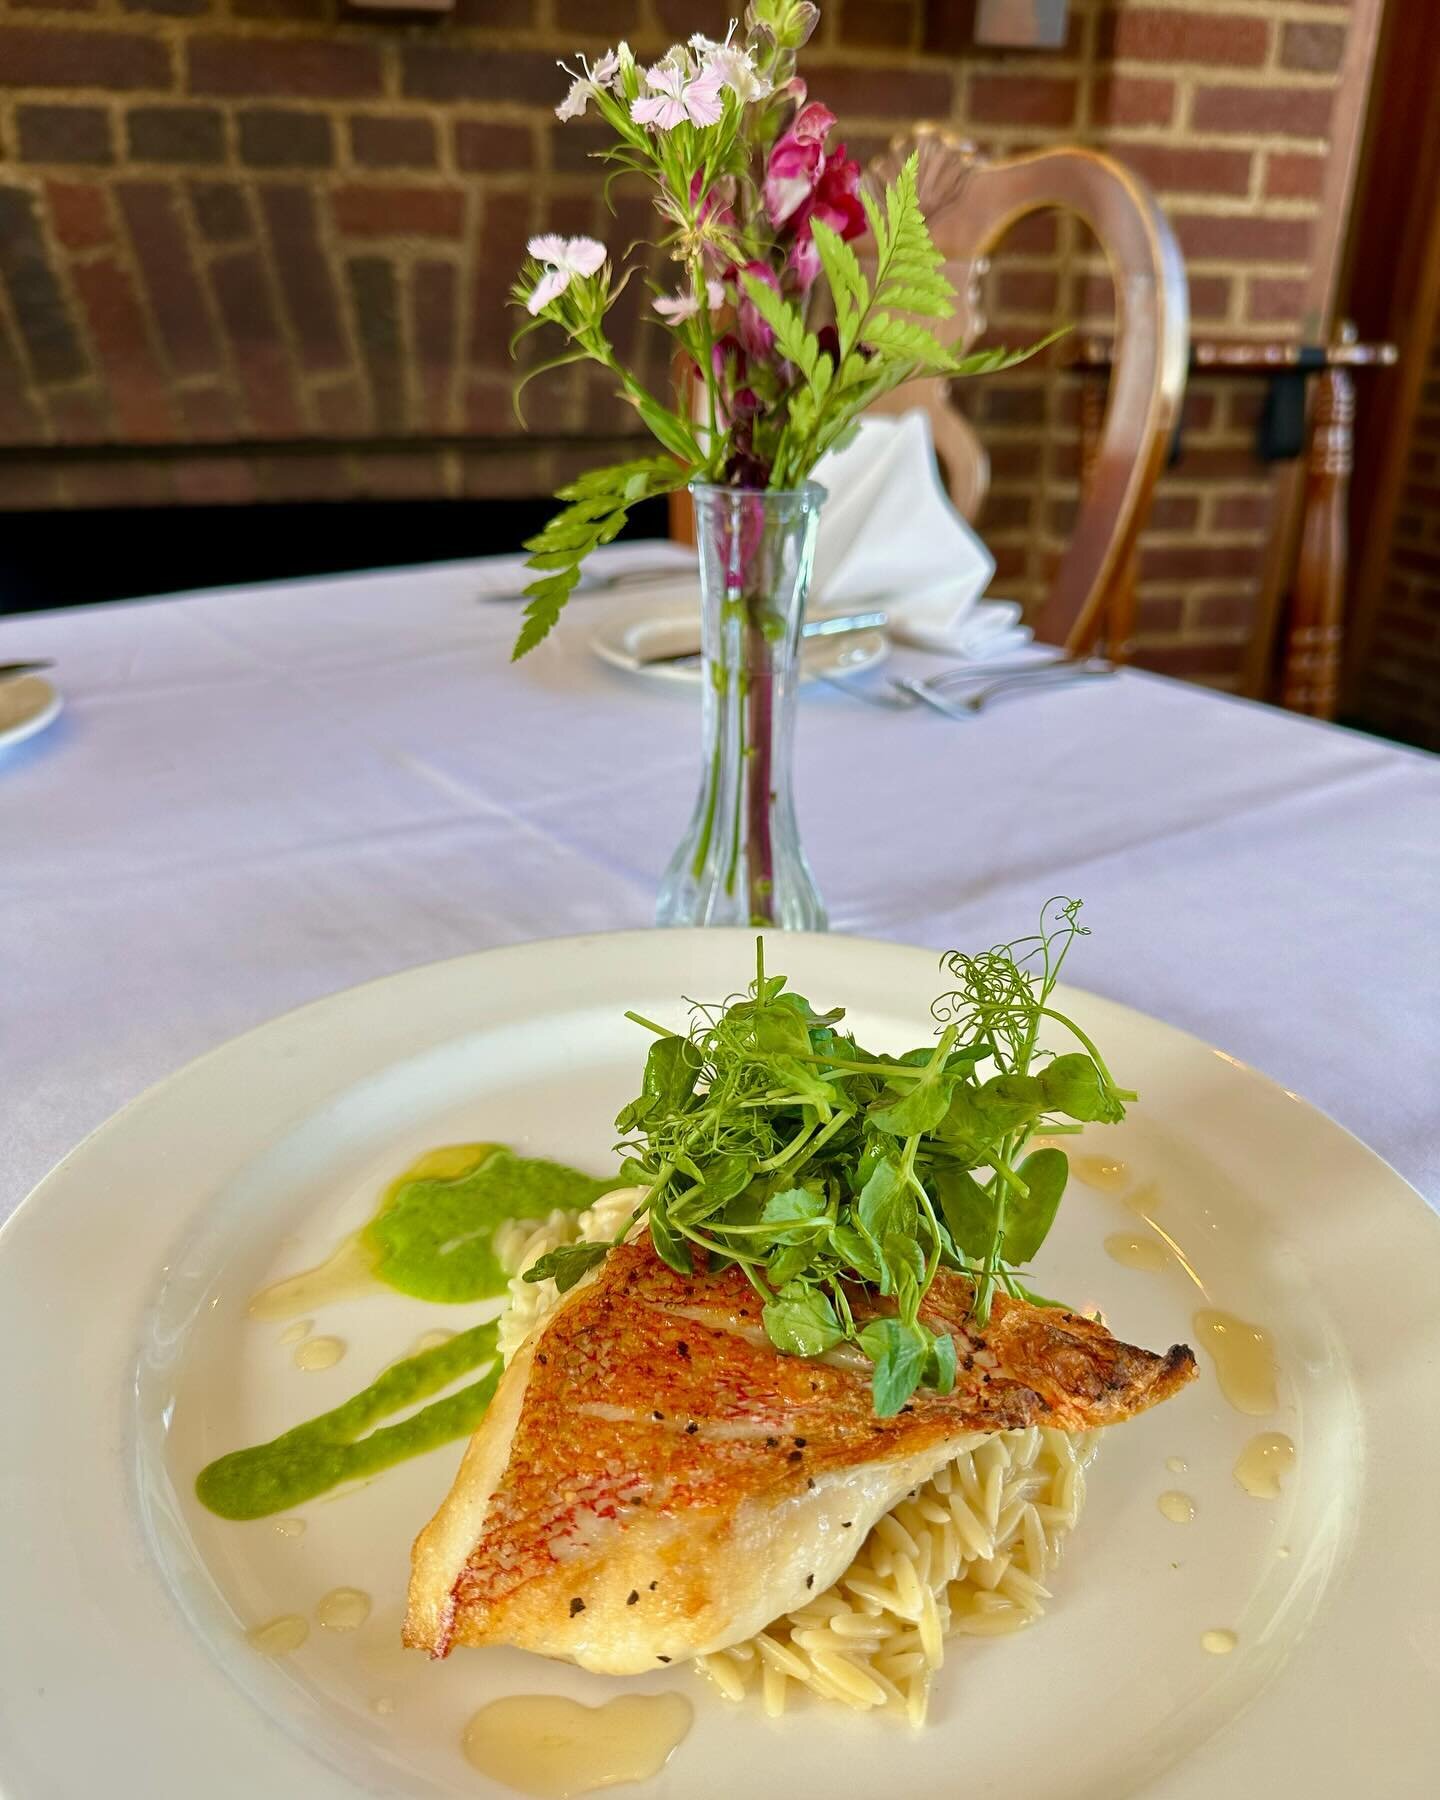 Red snapper weekend feature. Pan seared, topped with pea tendrils, nestled above creamy orzo, sweet pea pur&eacute;e and a &lsquo;snappy&rsquo; citrus gastrique. We&rsquo;re excited, and think you&rsquo;ll be also. Which style of white wine would you